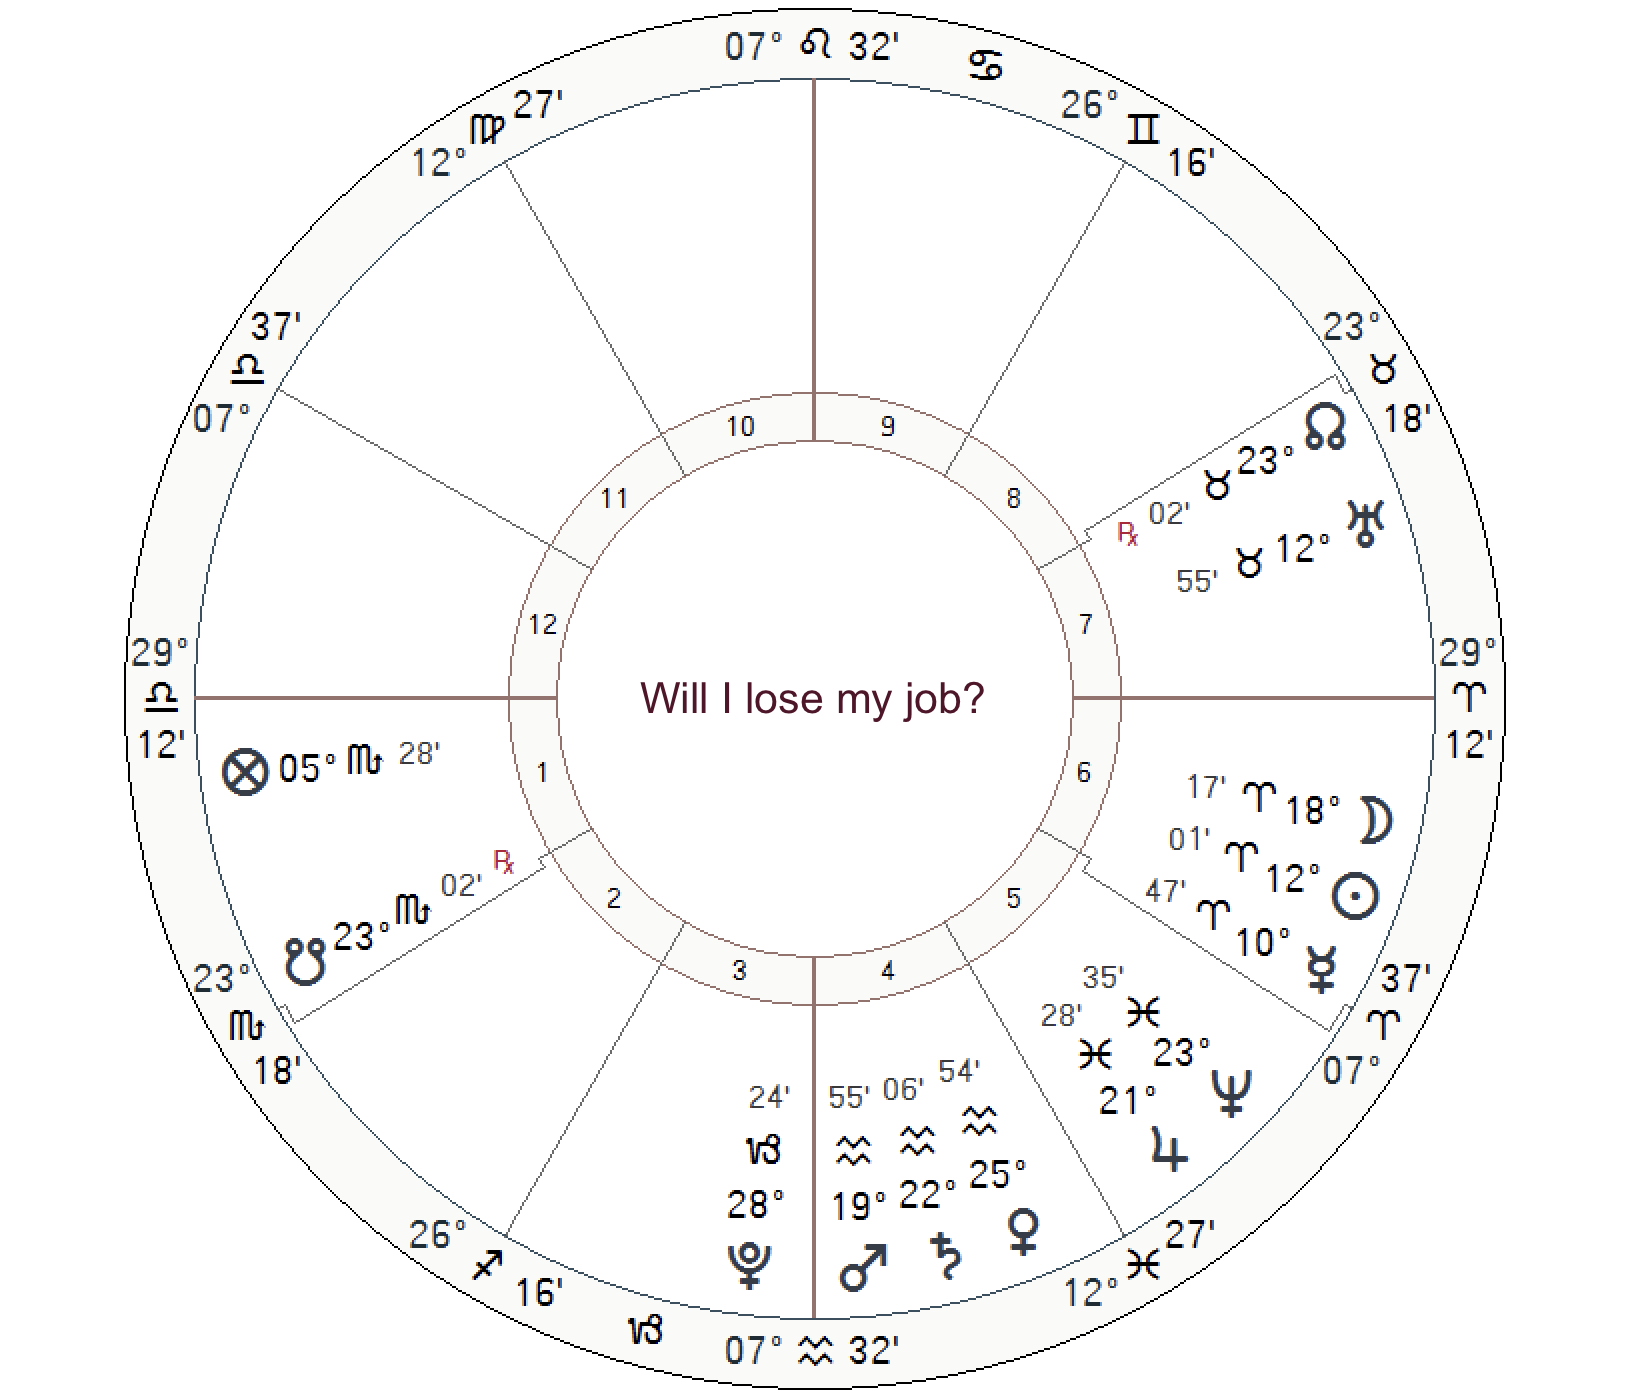 Horary astrology will I lose my job?